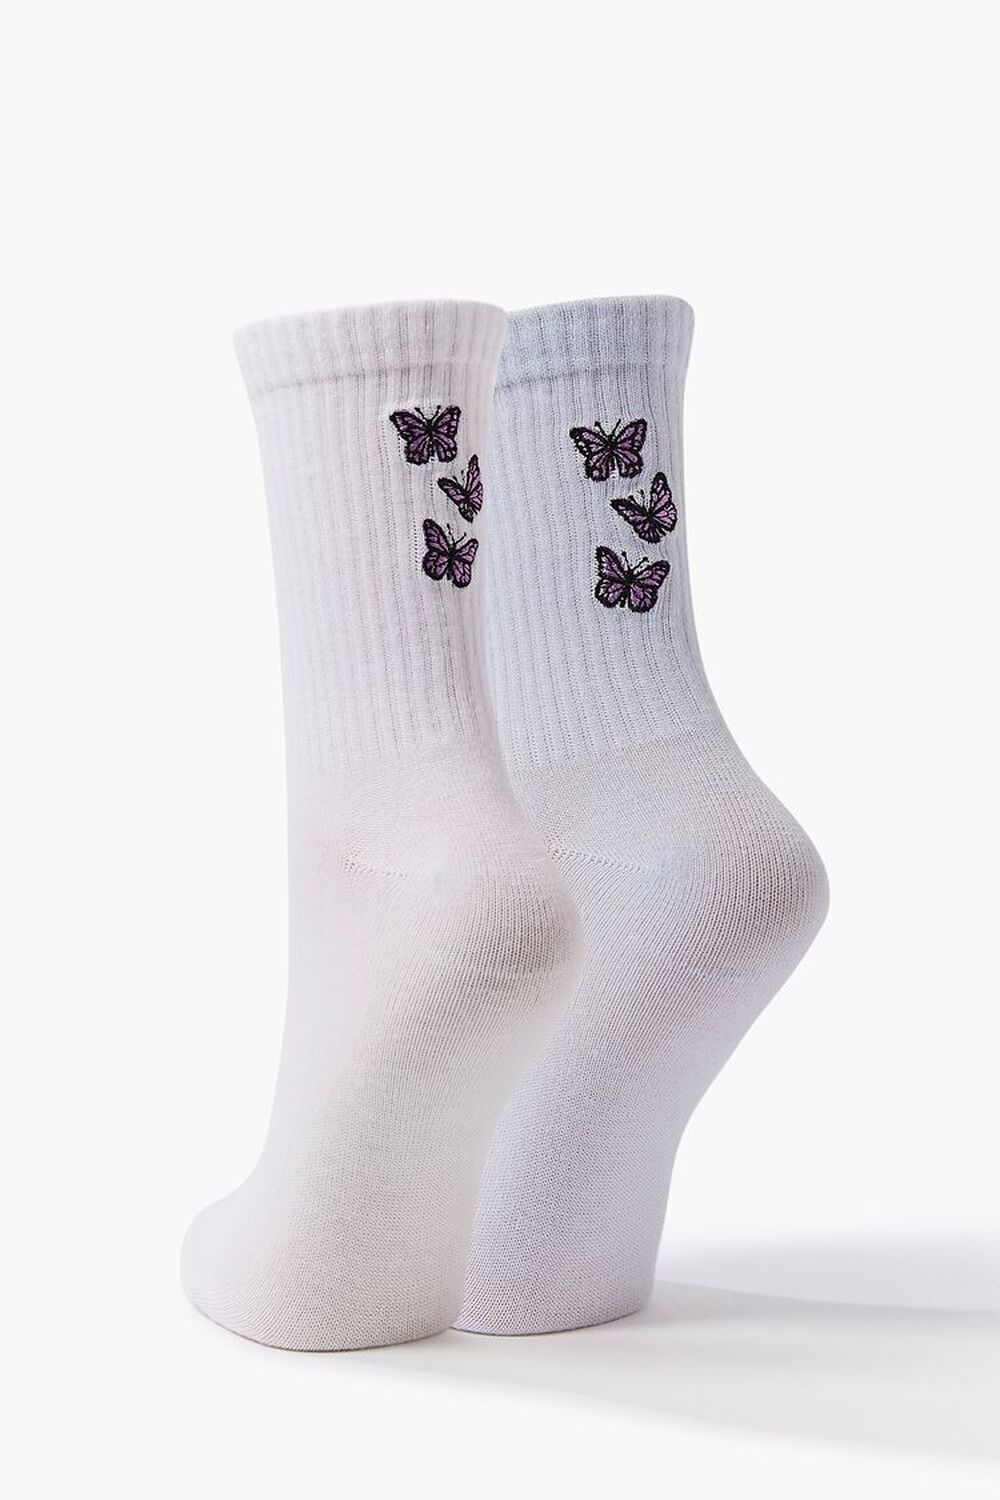 WHITE/BLUE Embroidered Butterfly Crew Sock Set, image 1